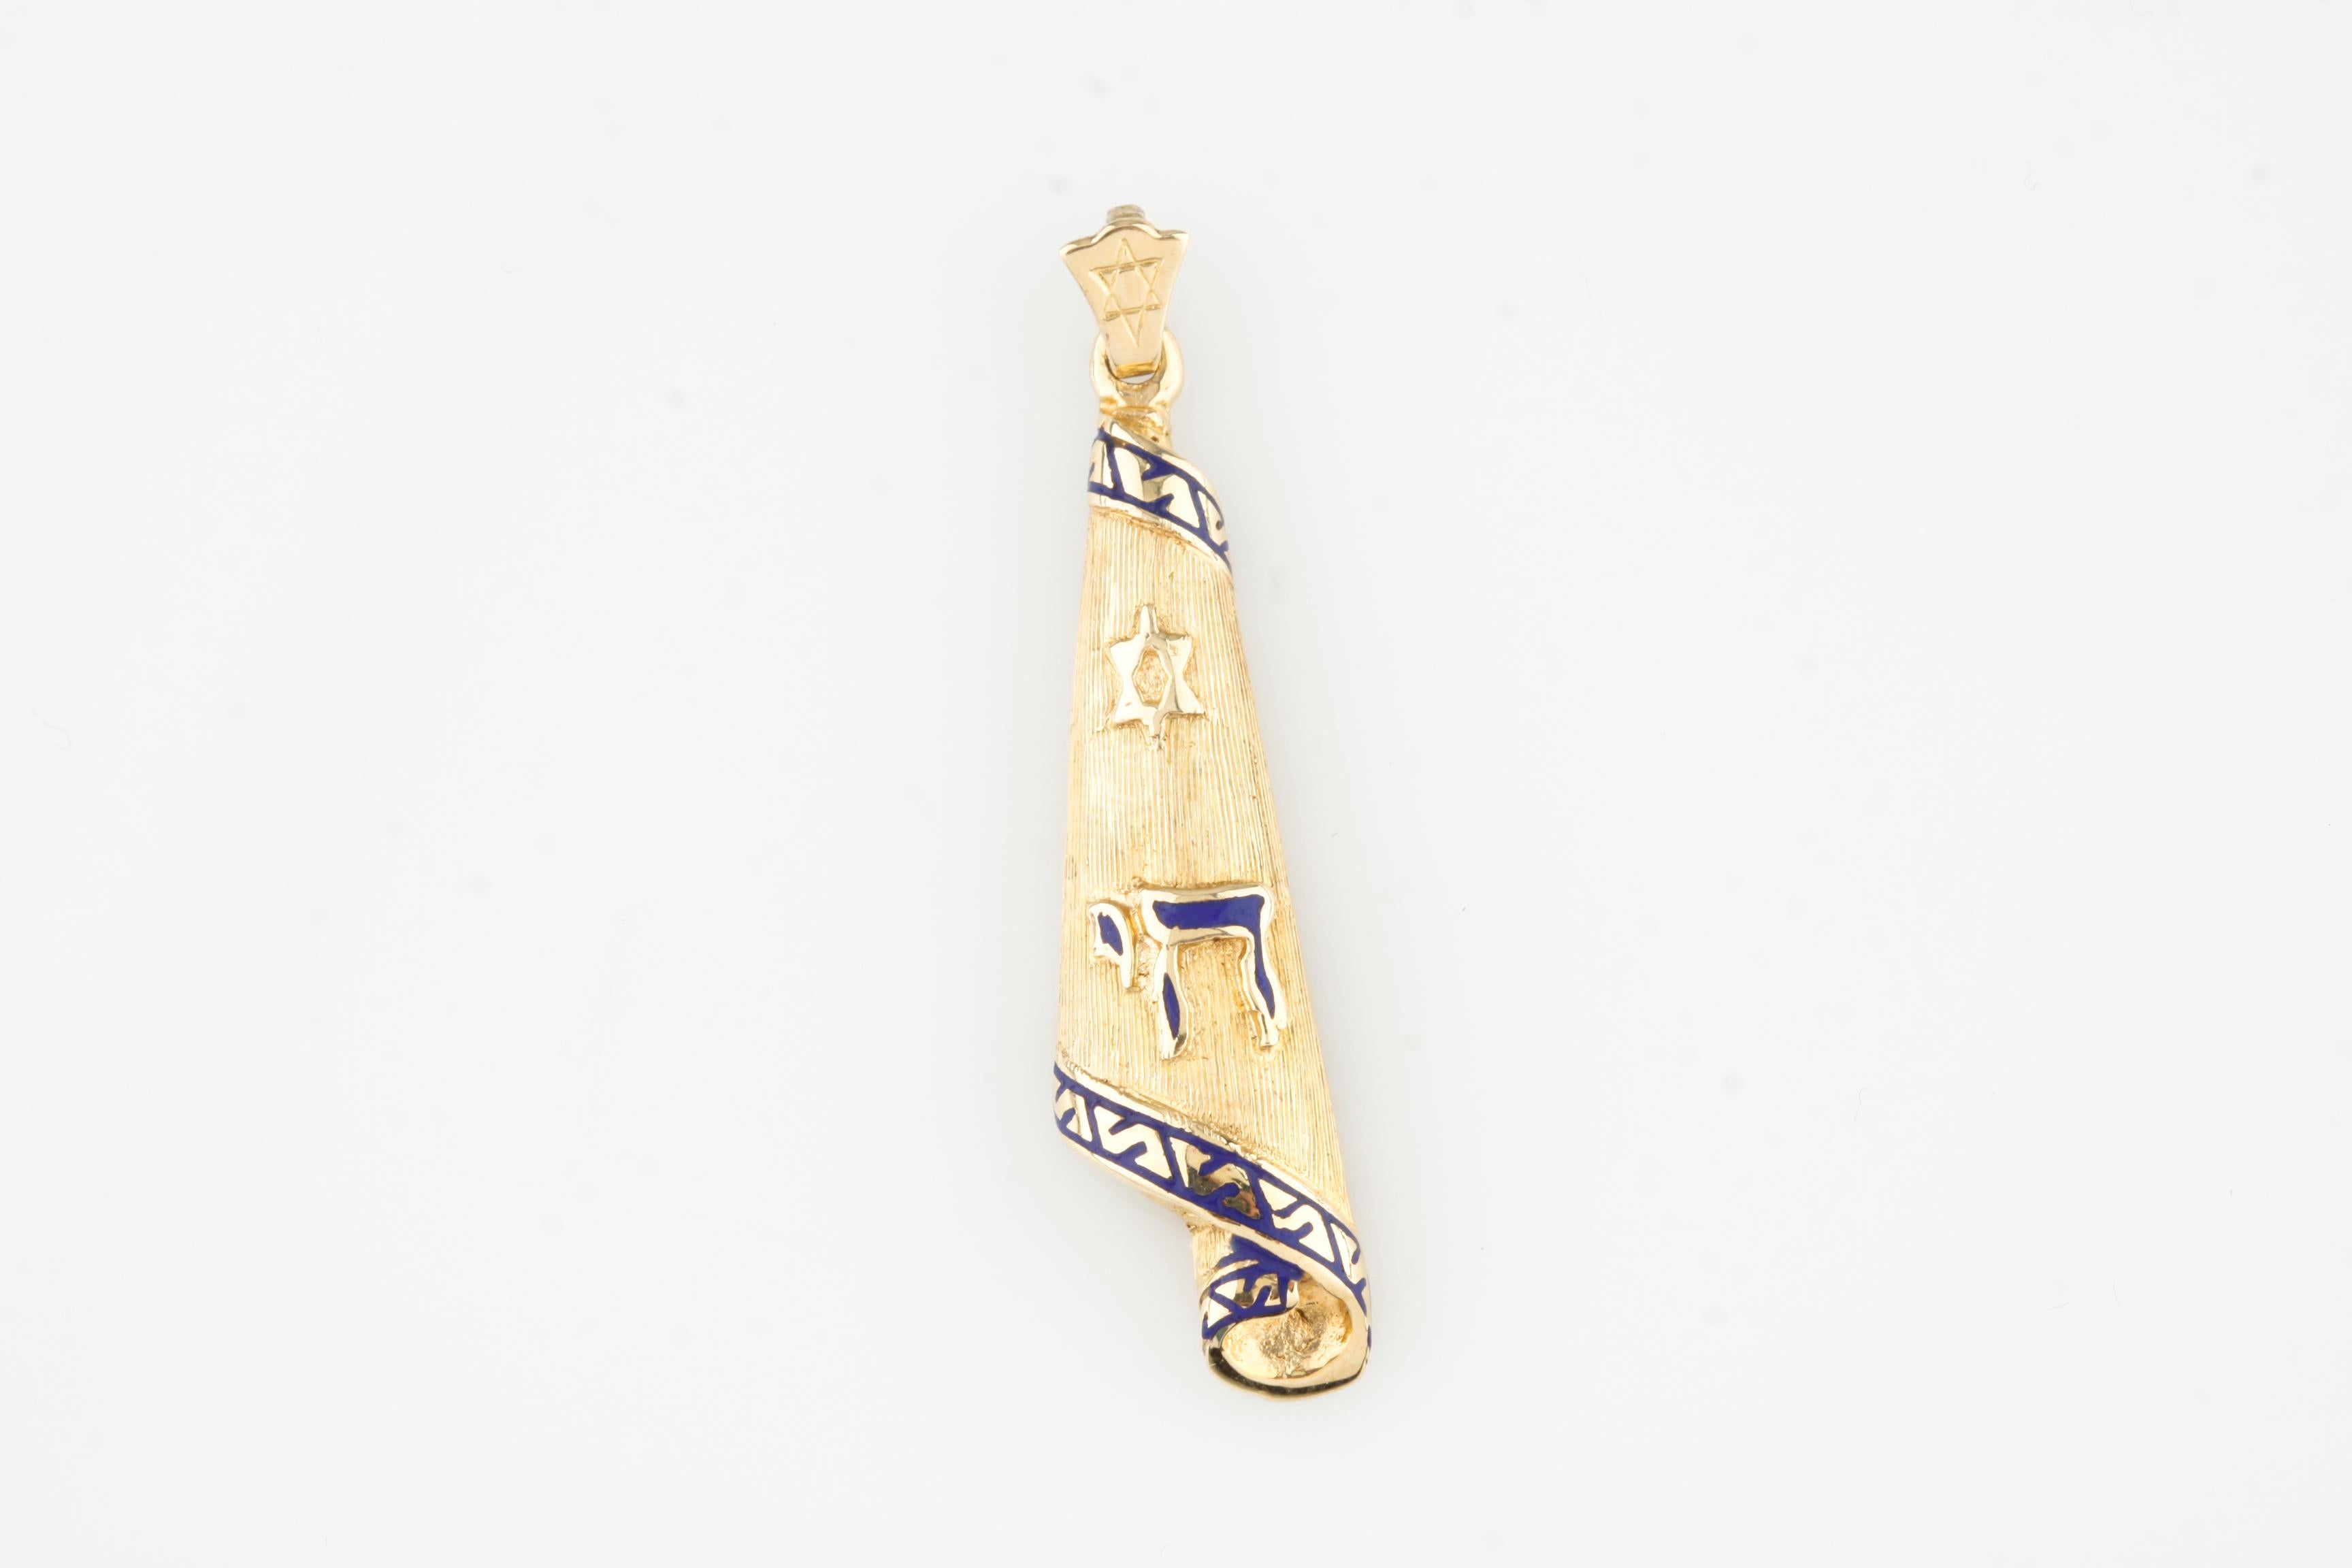 Beautiful Chai Pendant
Features Texture on Gold with Blue Enamel 